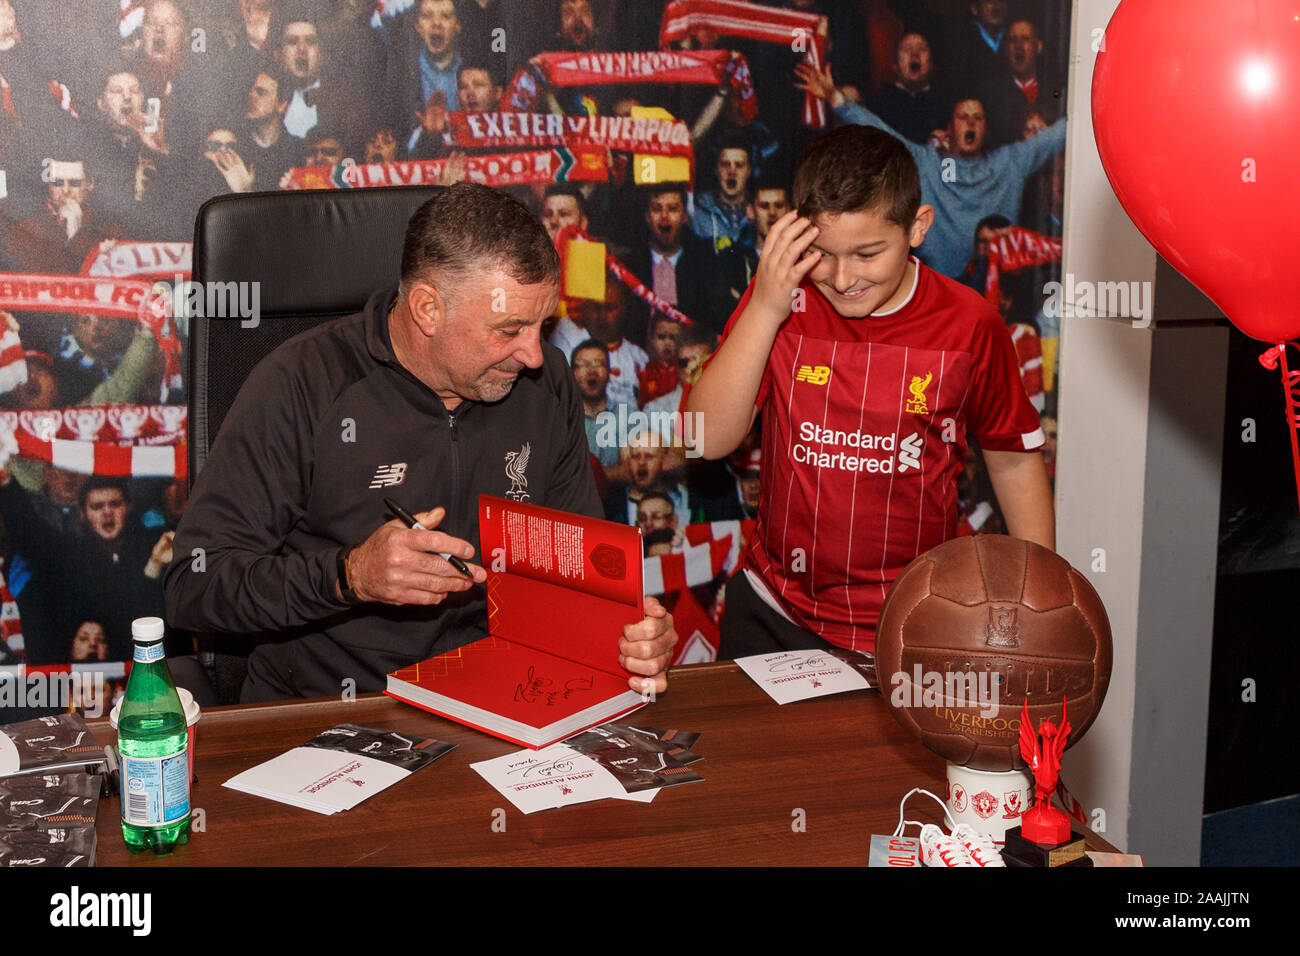 Cork, Ireland,  22nd November 2019. John Aldridge Meet and Greet at Liverpool FC Store, Cork City.  John Aldridge signing Mikail Farooq's (Wexford) LFC Book. People lined up in their masses in the pop up Liverpool FC Store on Maylor Street at pm today to attend a meet and greet with former football player and manager, John Aldridge. Credit: Damian Coleman Credit: Damian Coleman/Alamy Live News Stock Photo